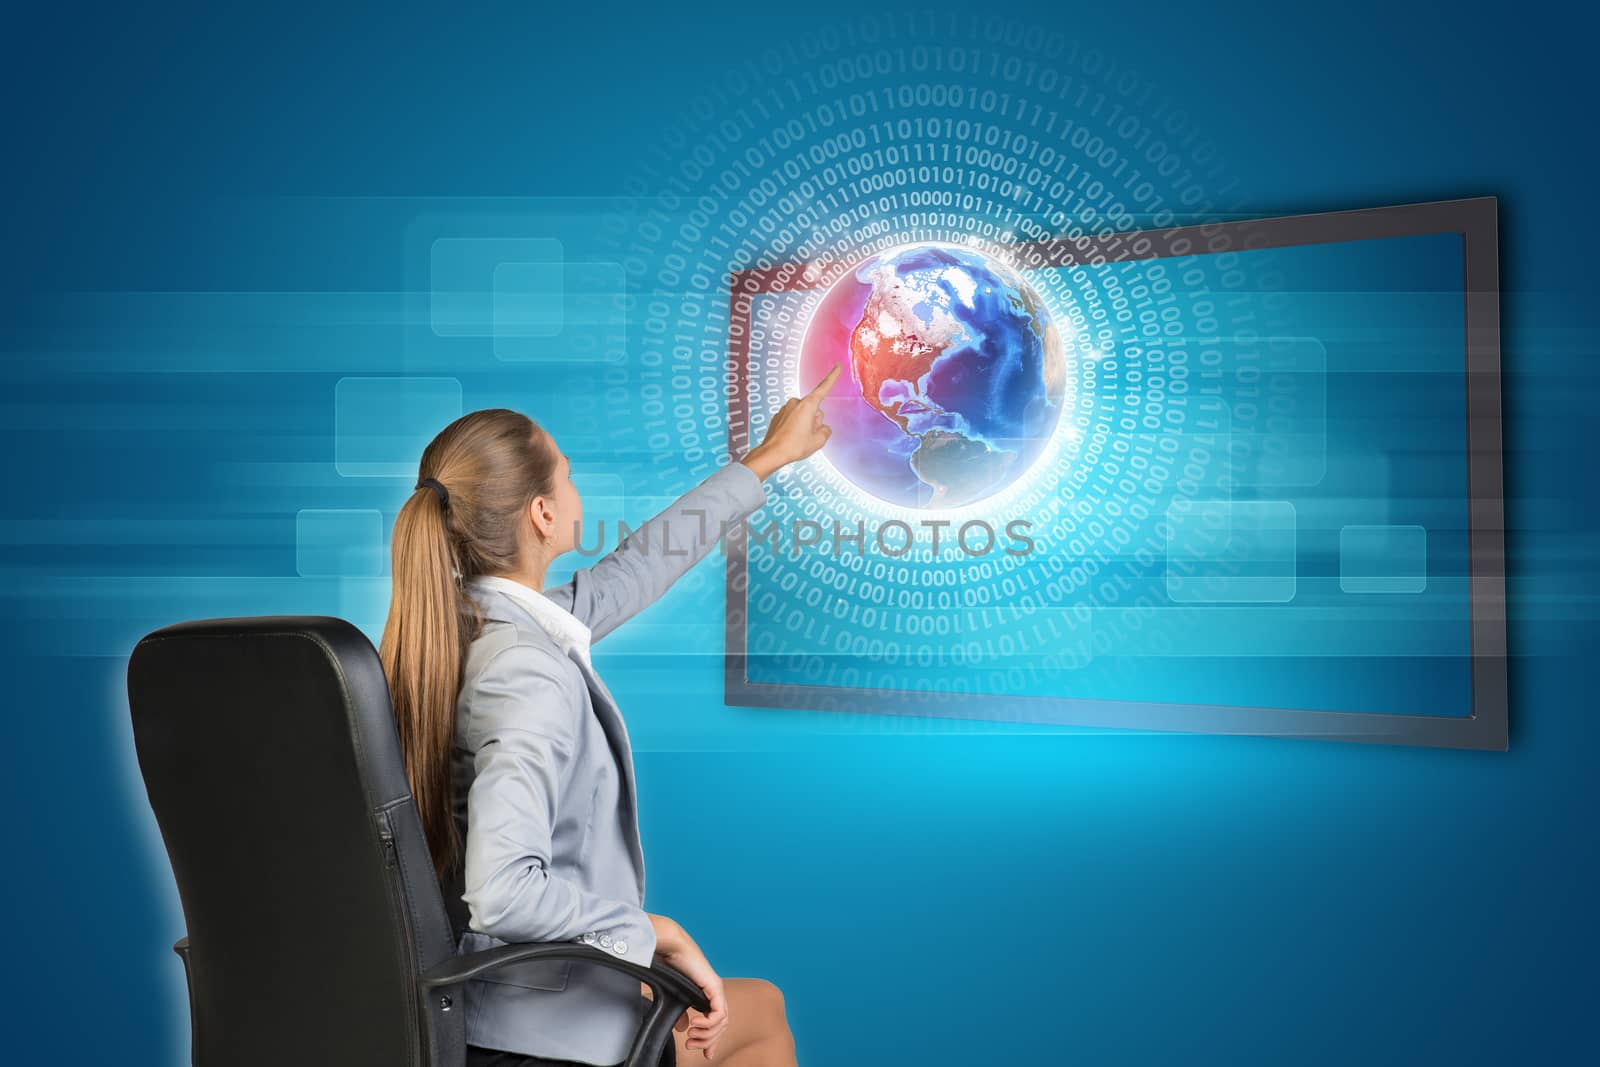 Businesswoman using touch screen interface with Globe and radiant figures, on blue background. Element of this image furnished by NASA